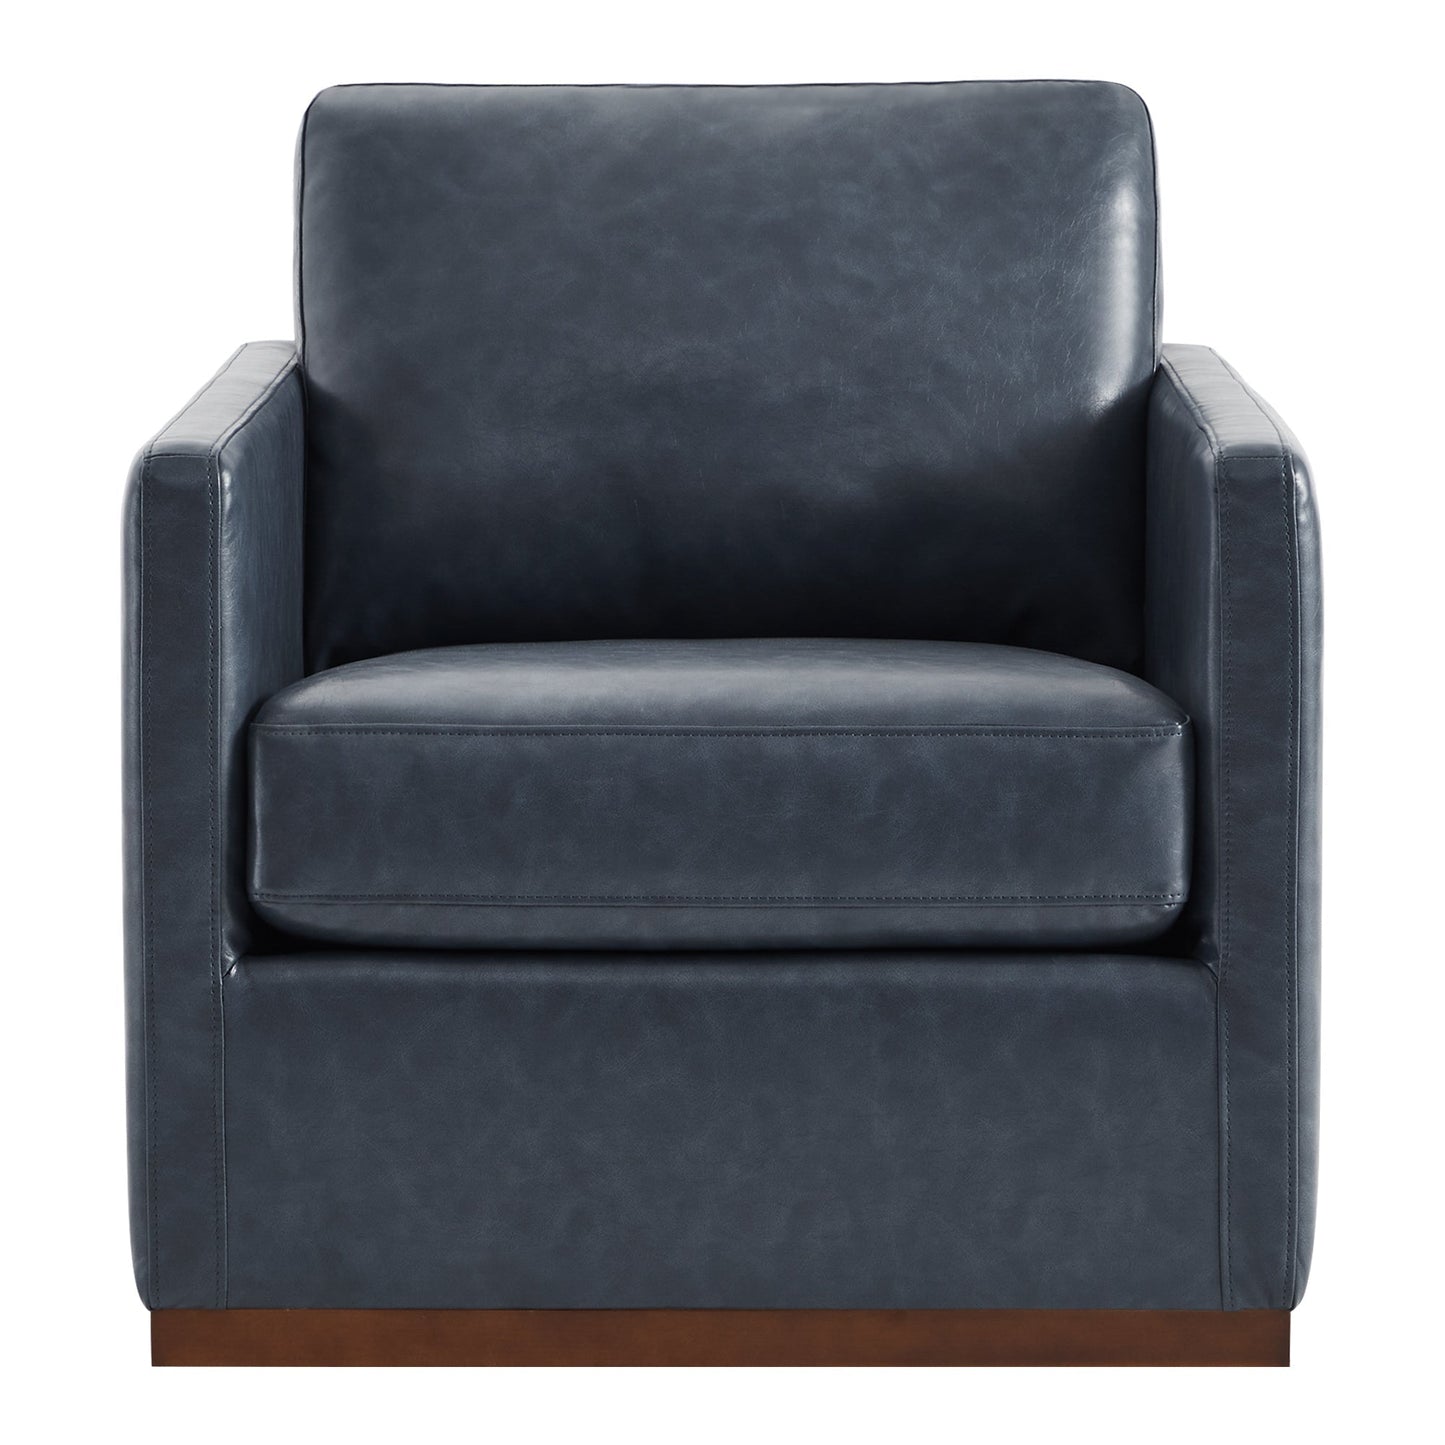 CHITA LIVING-Henry Modern Swivel Accent Chair-Accent Chair-Faux Leather-Navy Blue-